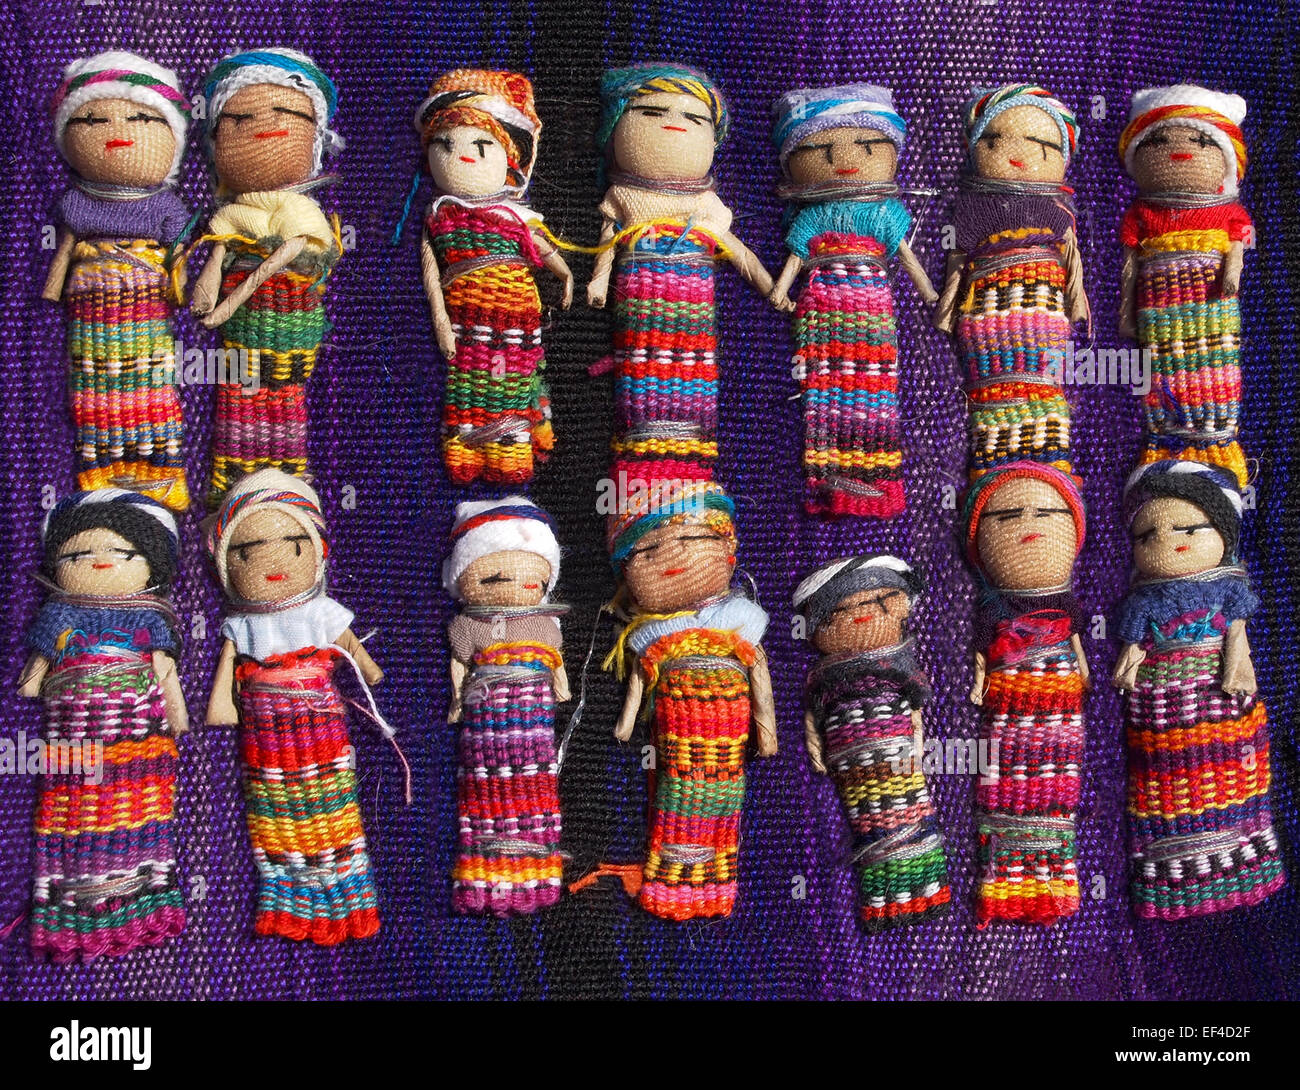 A collection of large, colorful Guatemalan Worry Dolls lined up in two rows  on a purple woven blanket Stock Photo - Alamy